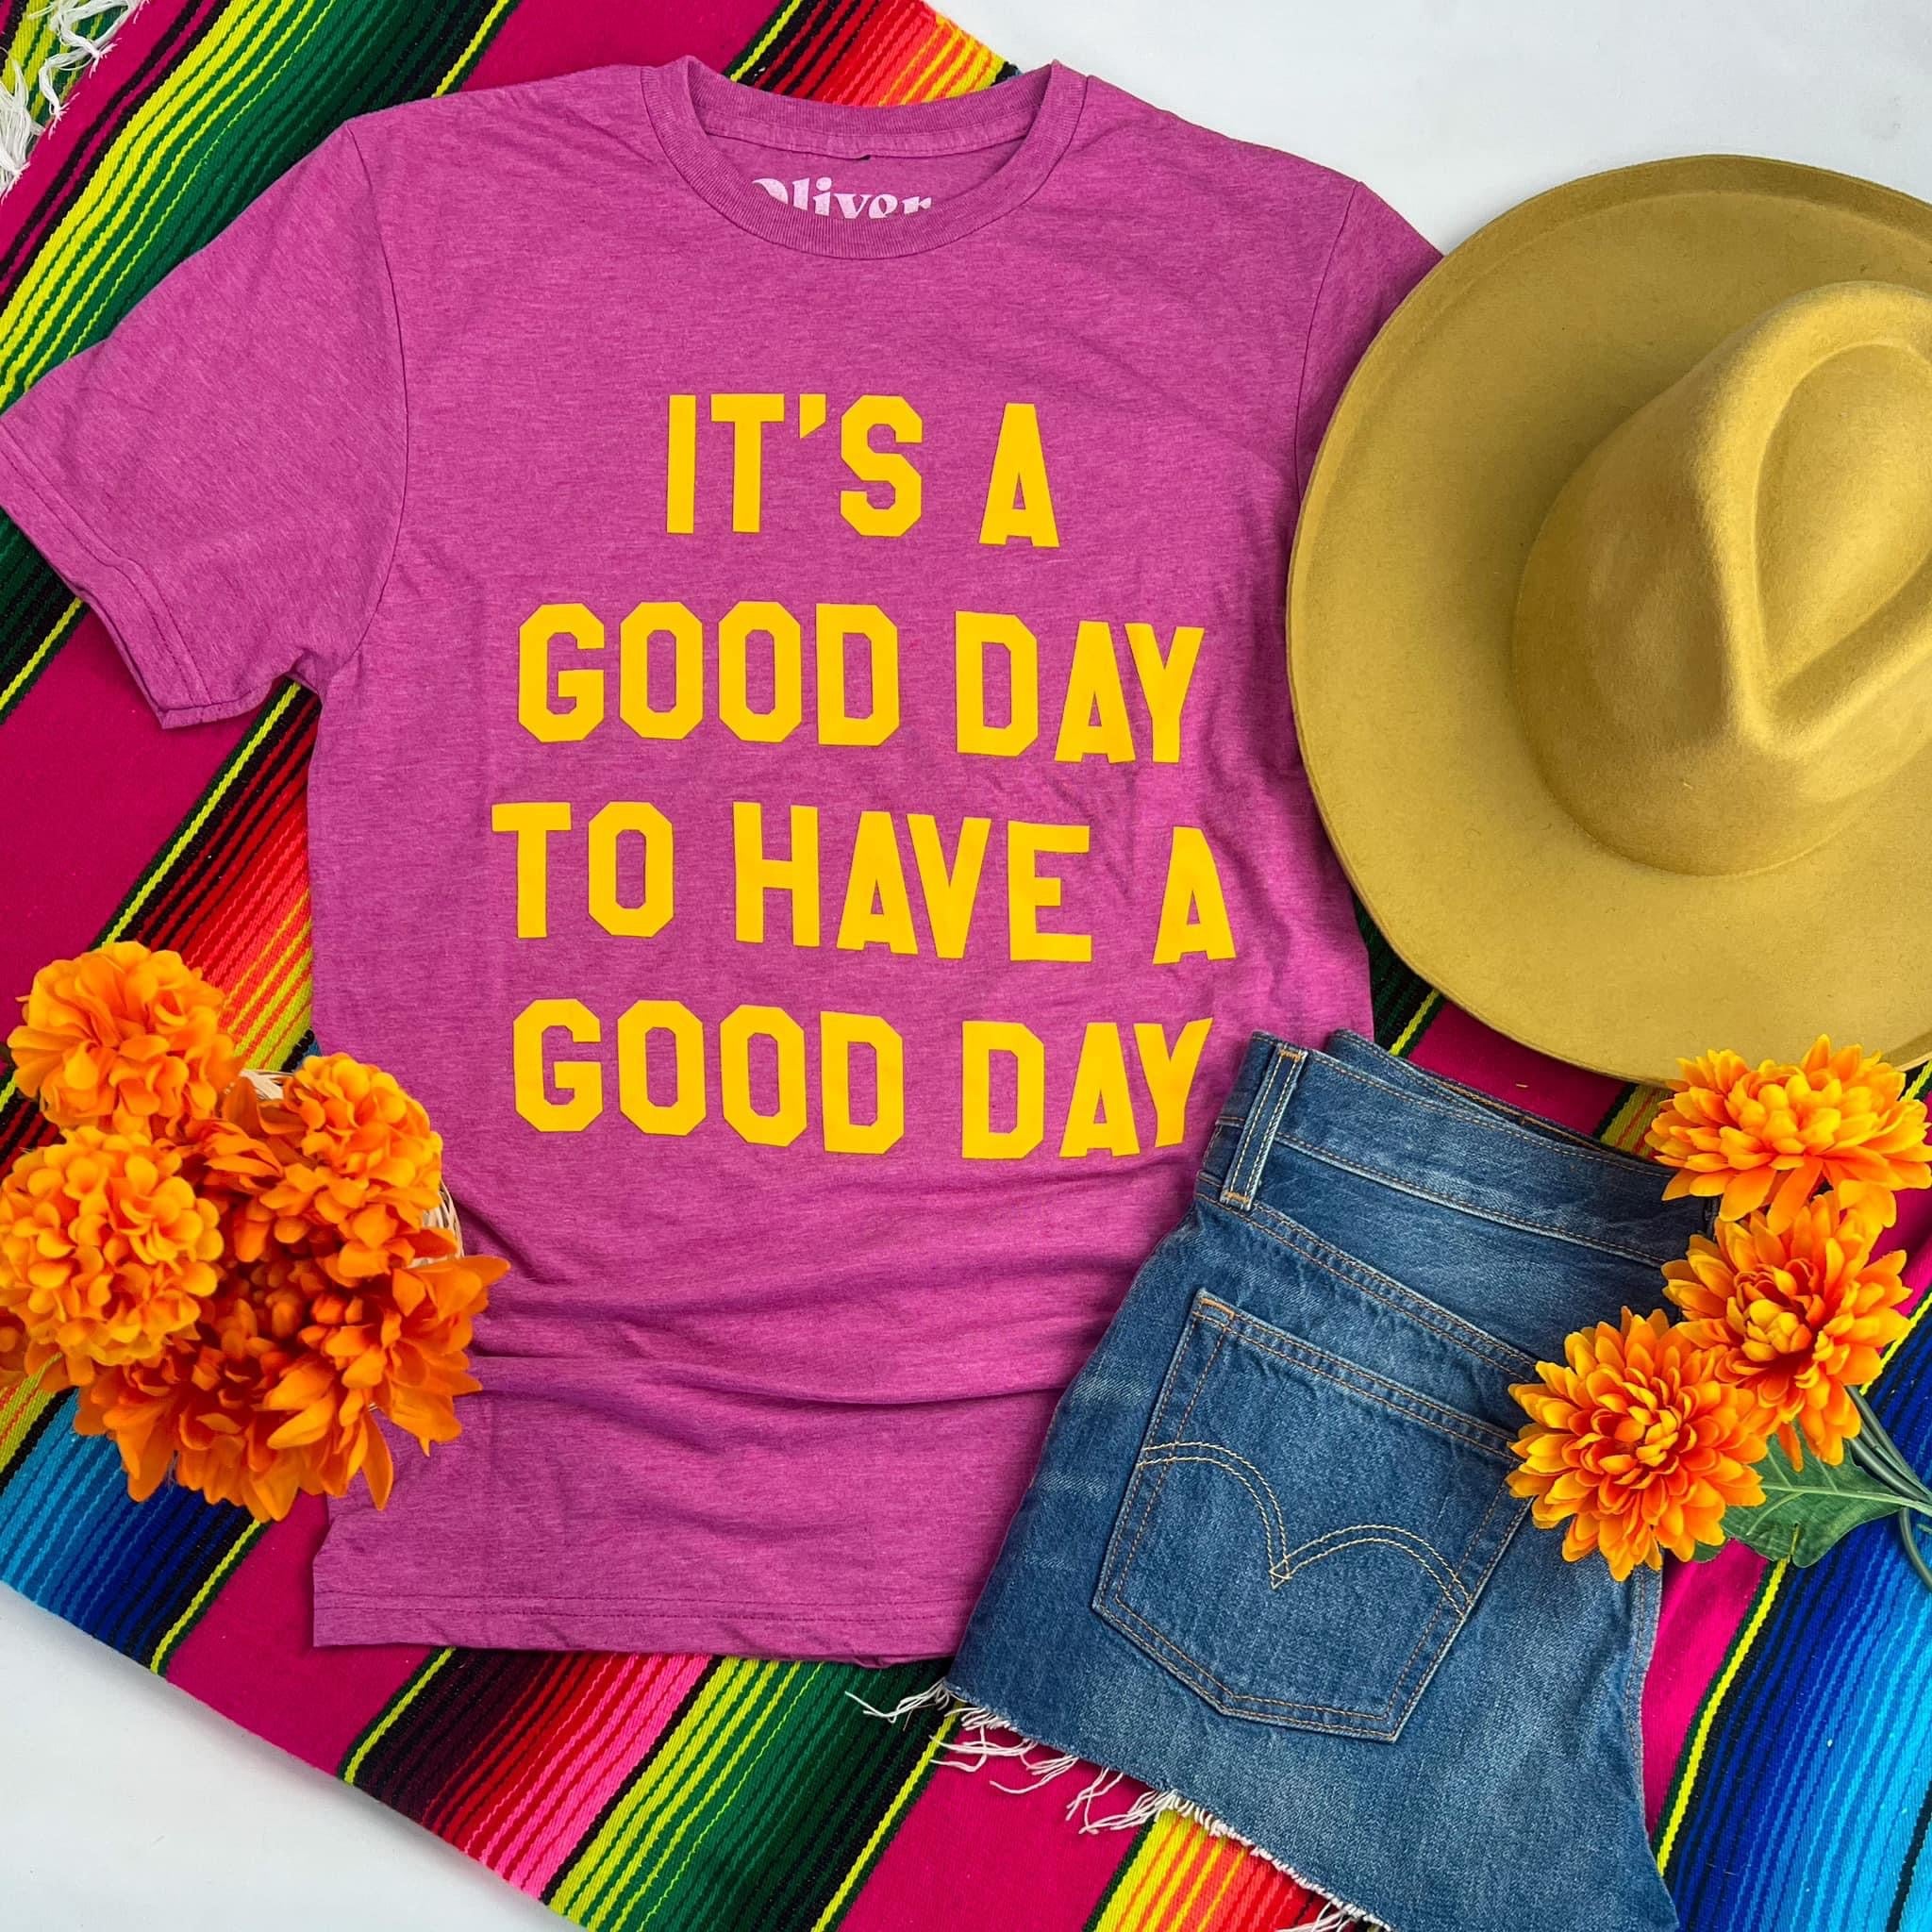 It's A Good Day To Have a Good Day Graphic Tee